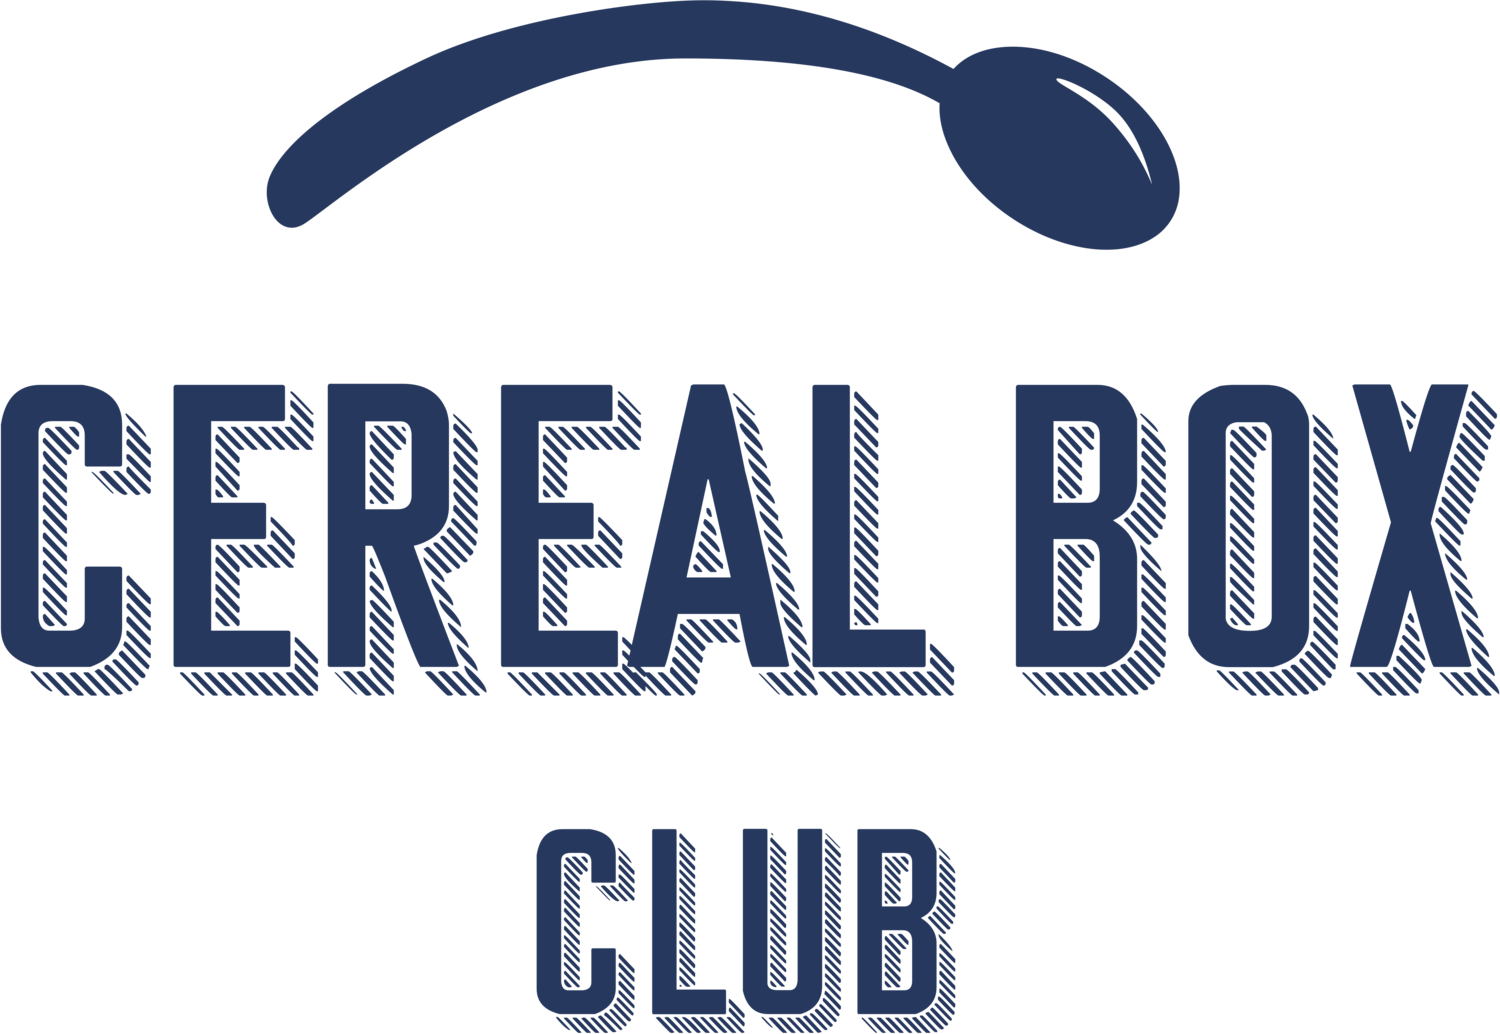 The Cereal Box Club